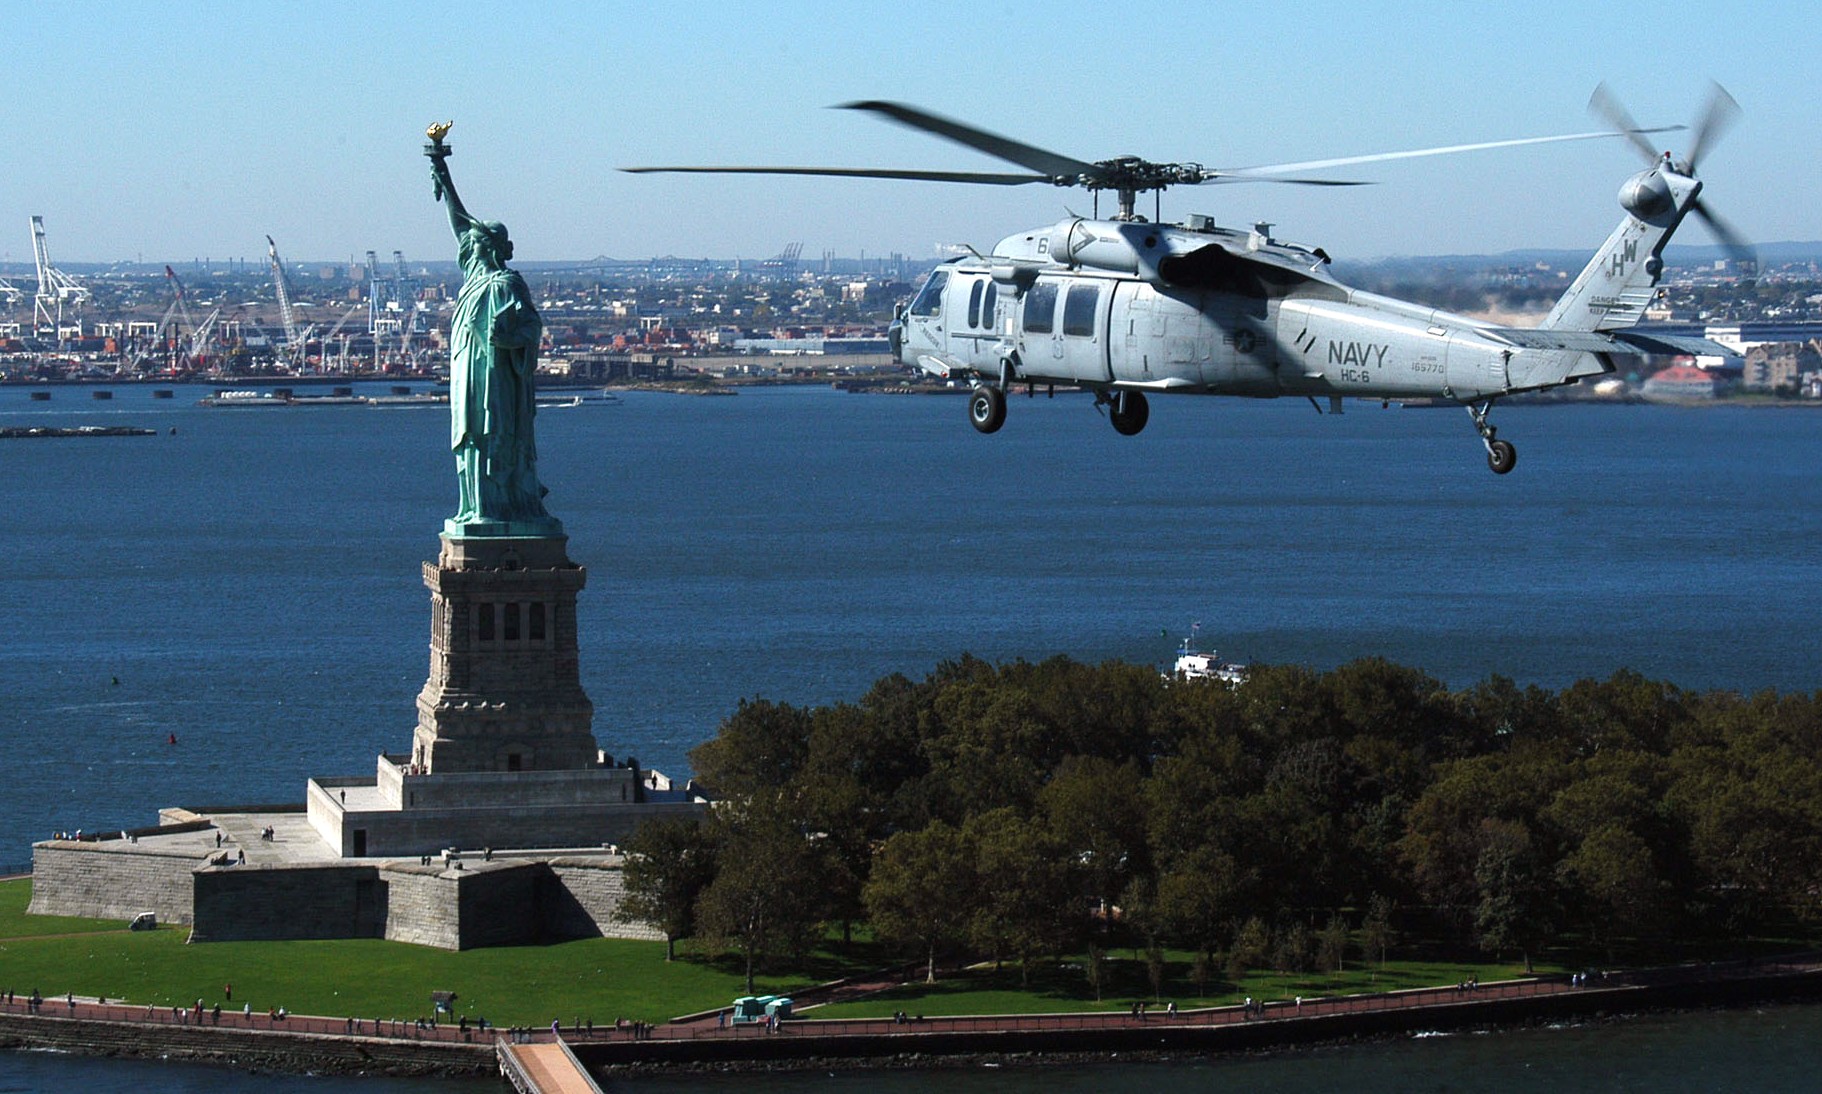 hc-6 chargers helicopter combat support squadron navy mh-60s seahawk 09 new york